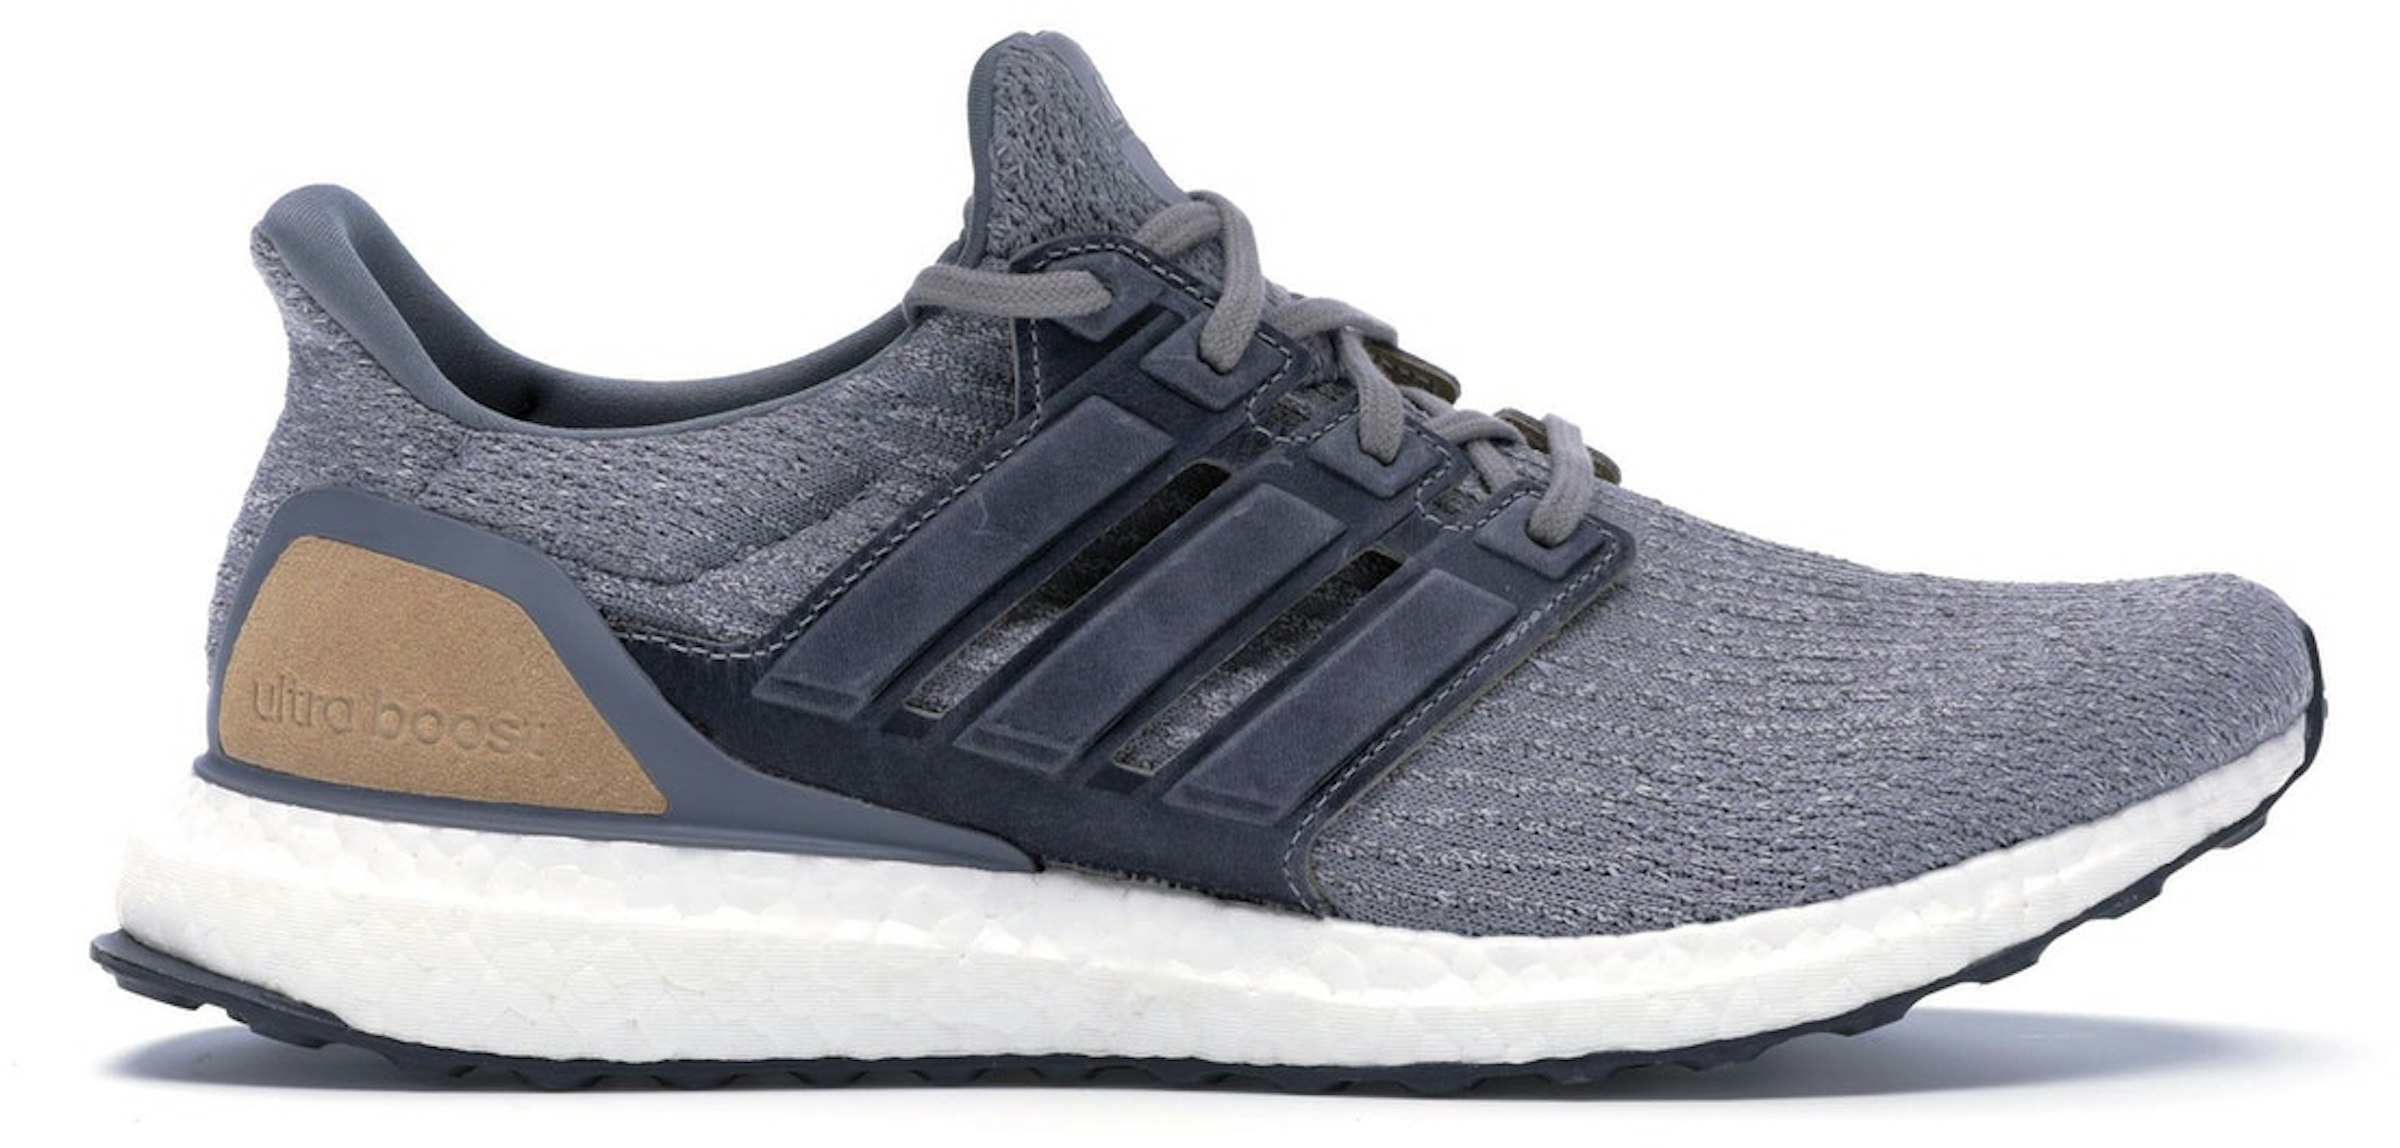 kyst afsked Avl adidas Ultra Boost 3.0 Grey Leather Cage - BB1092 - GB